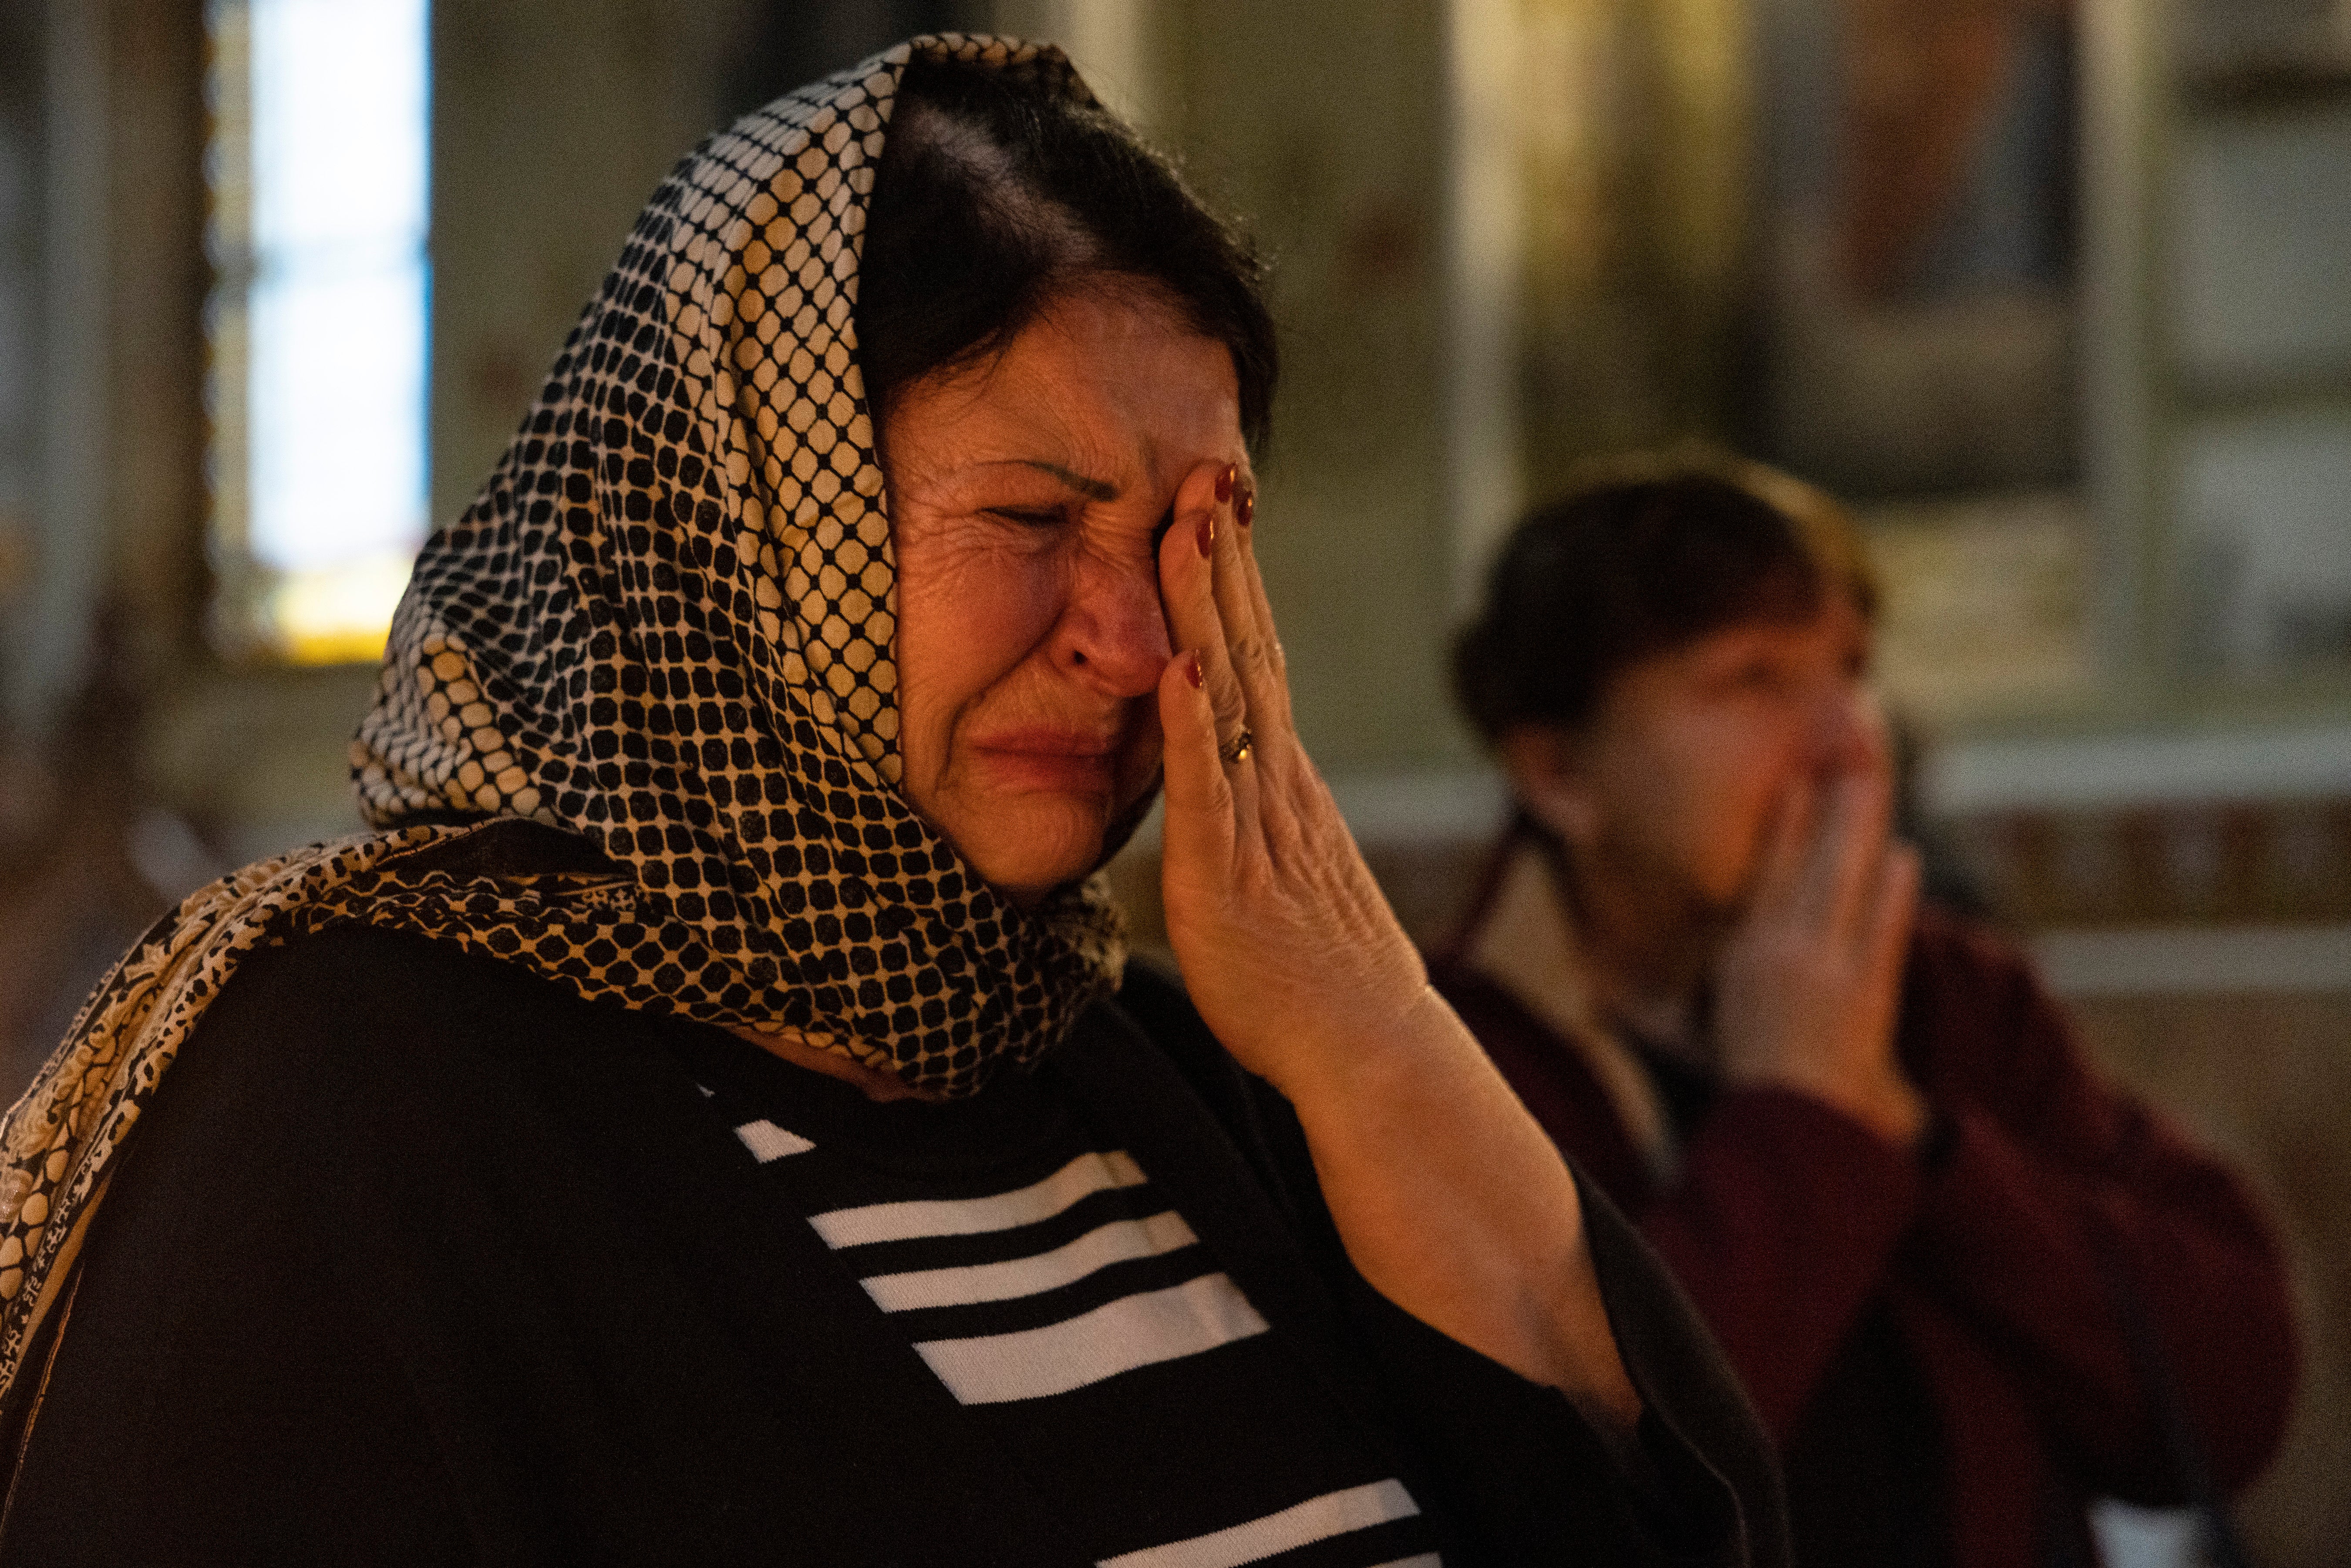 Tetiana cries as she prays during a Sunday afternoon service at the Pokrovsky cathedral in Kharkiv